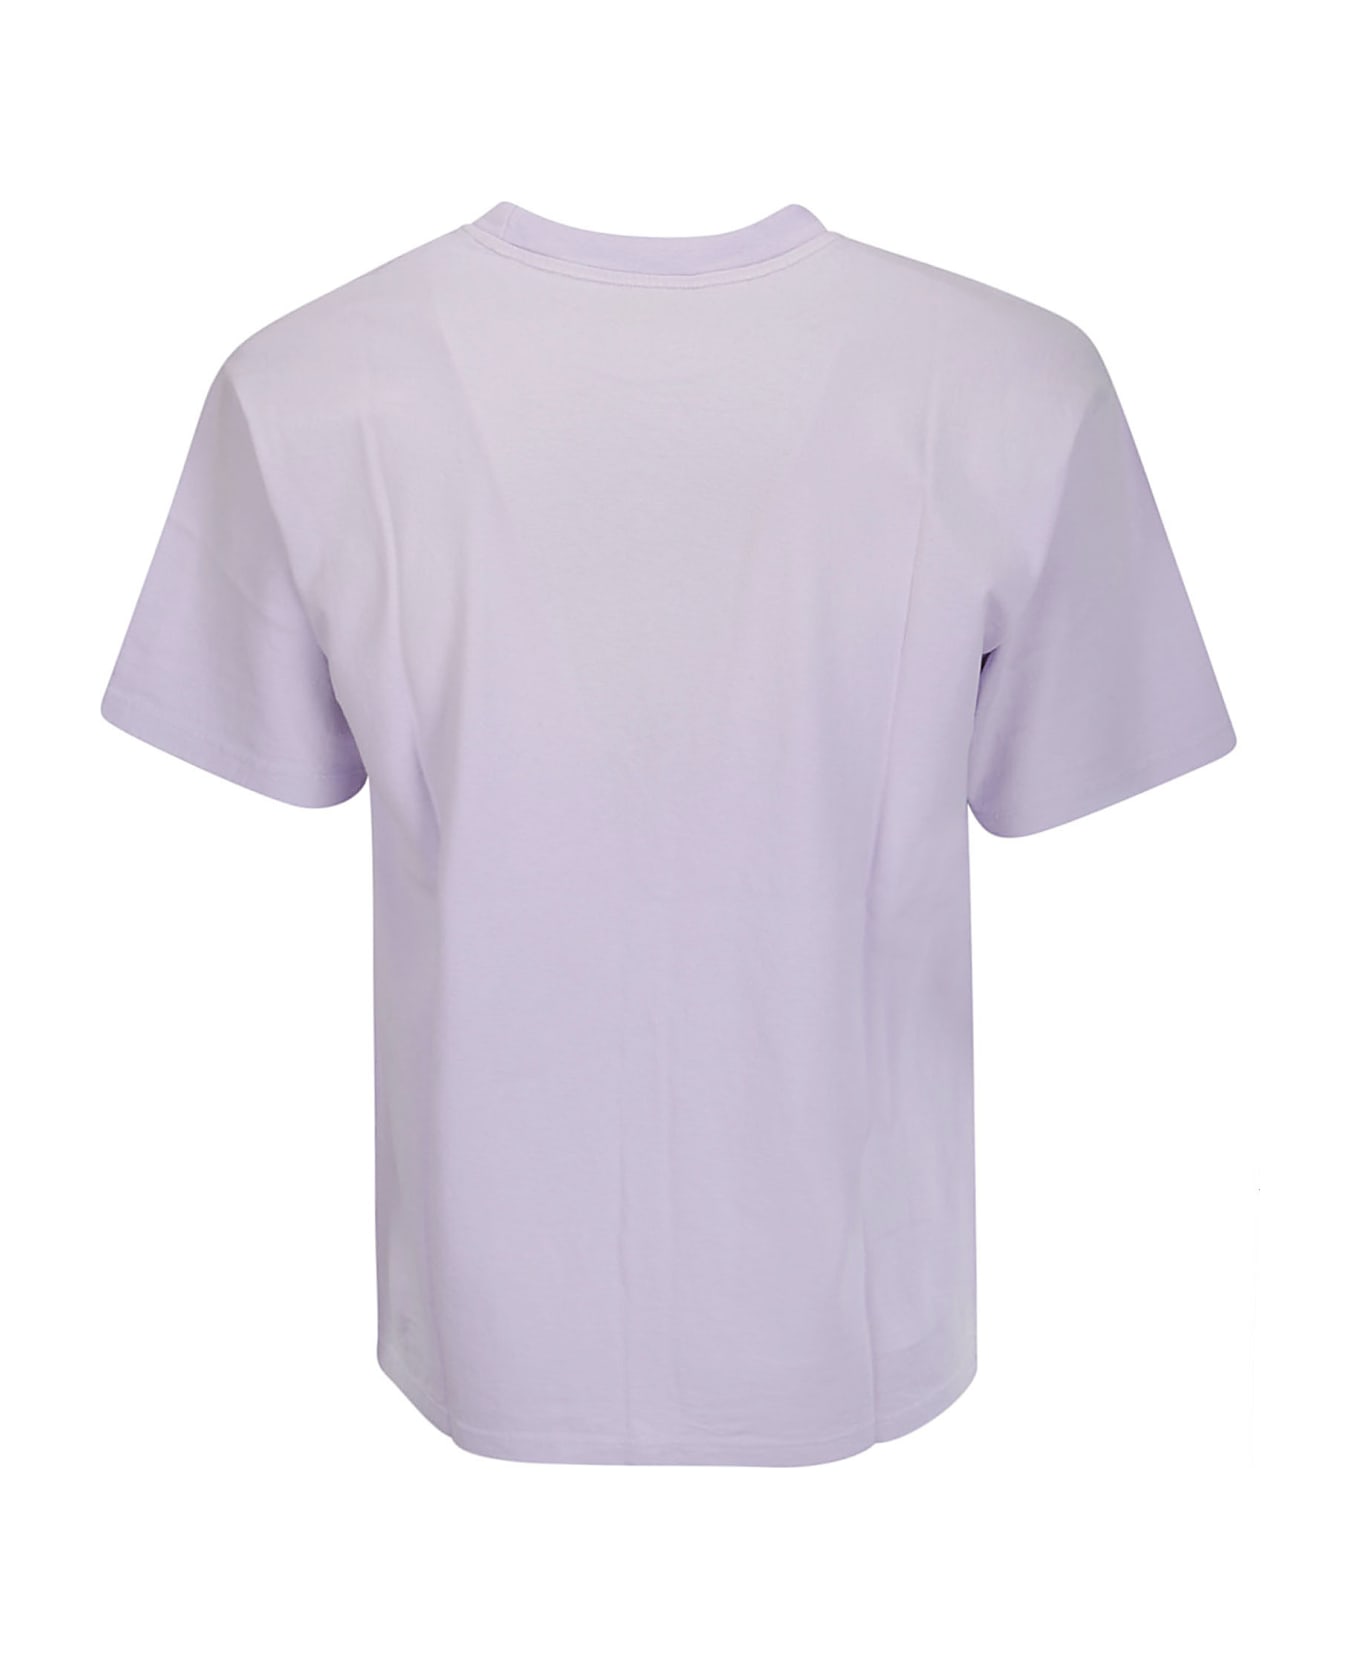 Aries Sunbleached Temple Ss Tee - FADED PURPLE Tシャツ